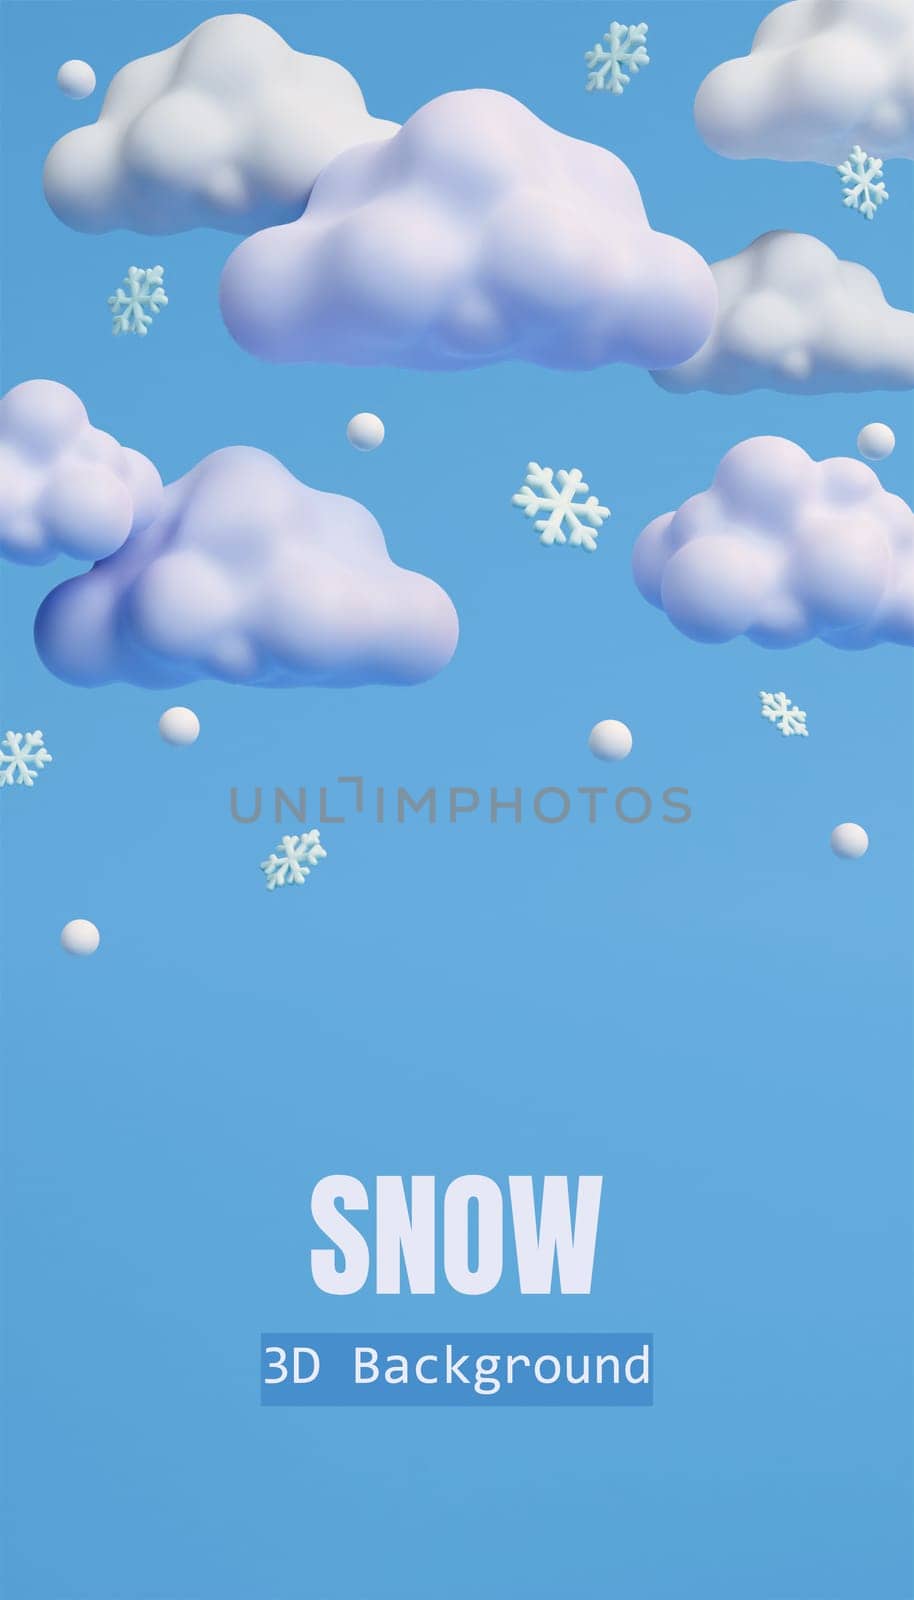 3d Weather forecast. Cloudy with snowy. Meteorological. 3d rendering illustration. by meepiangraphic